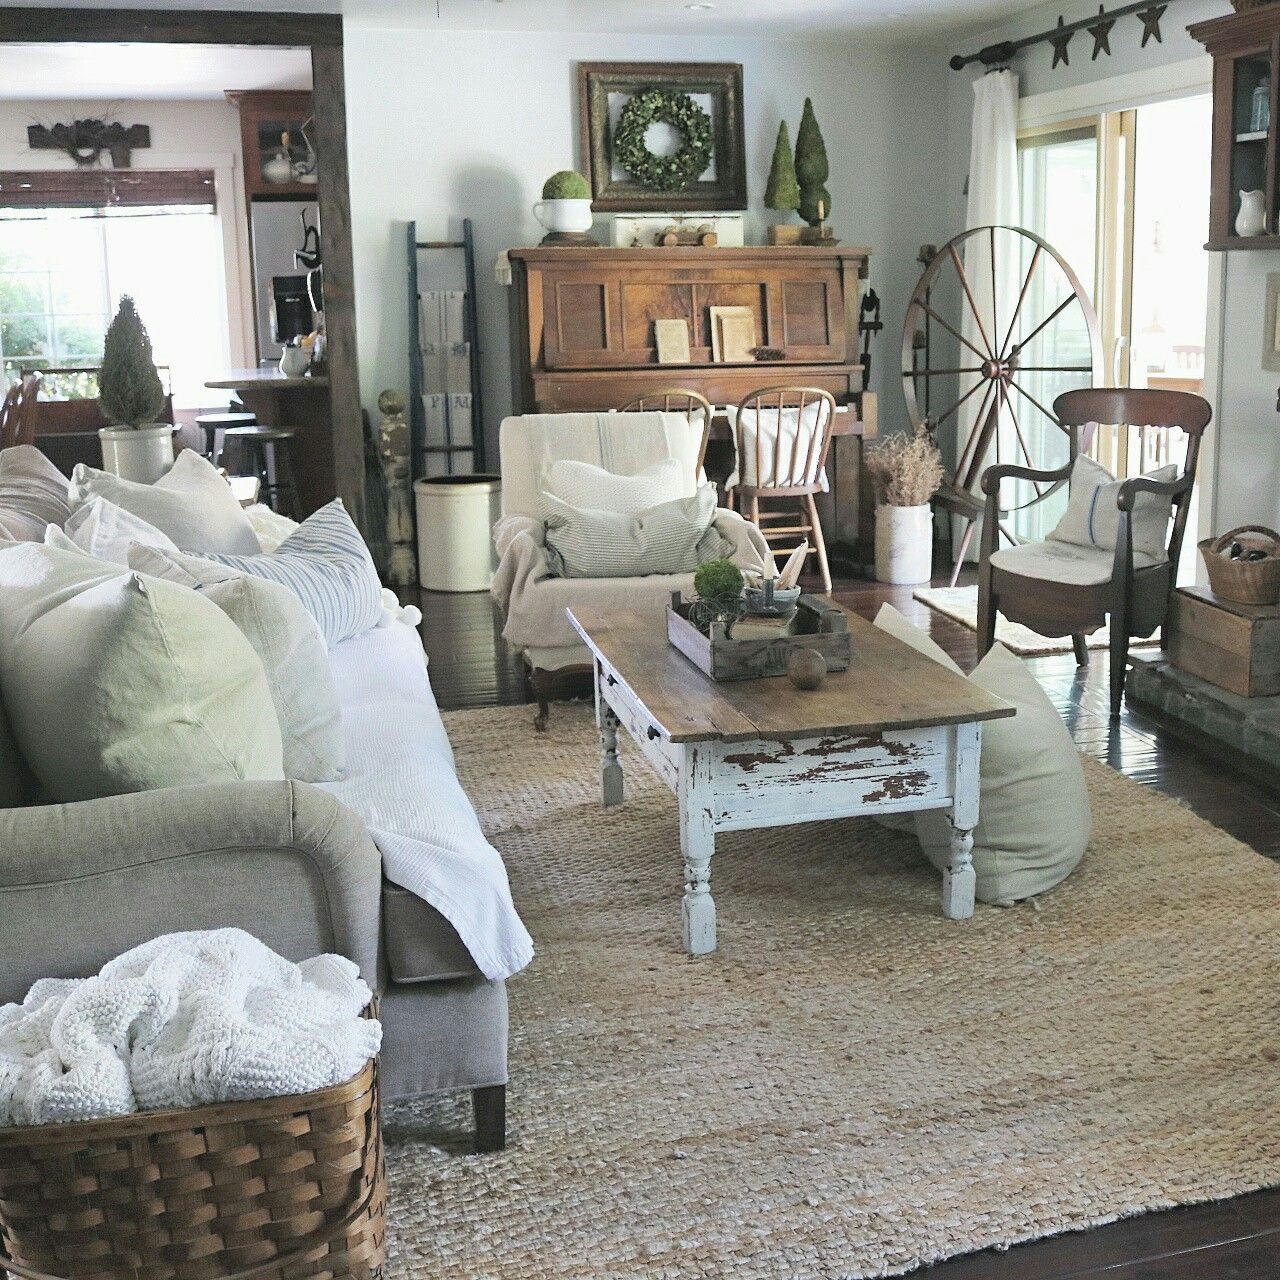 Farmhouse Living Room Rug
 Farmhouse Living Room at home on SweetCreek